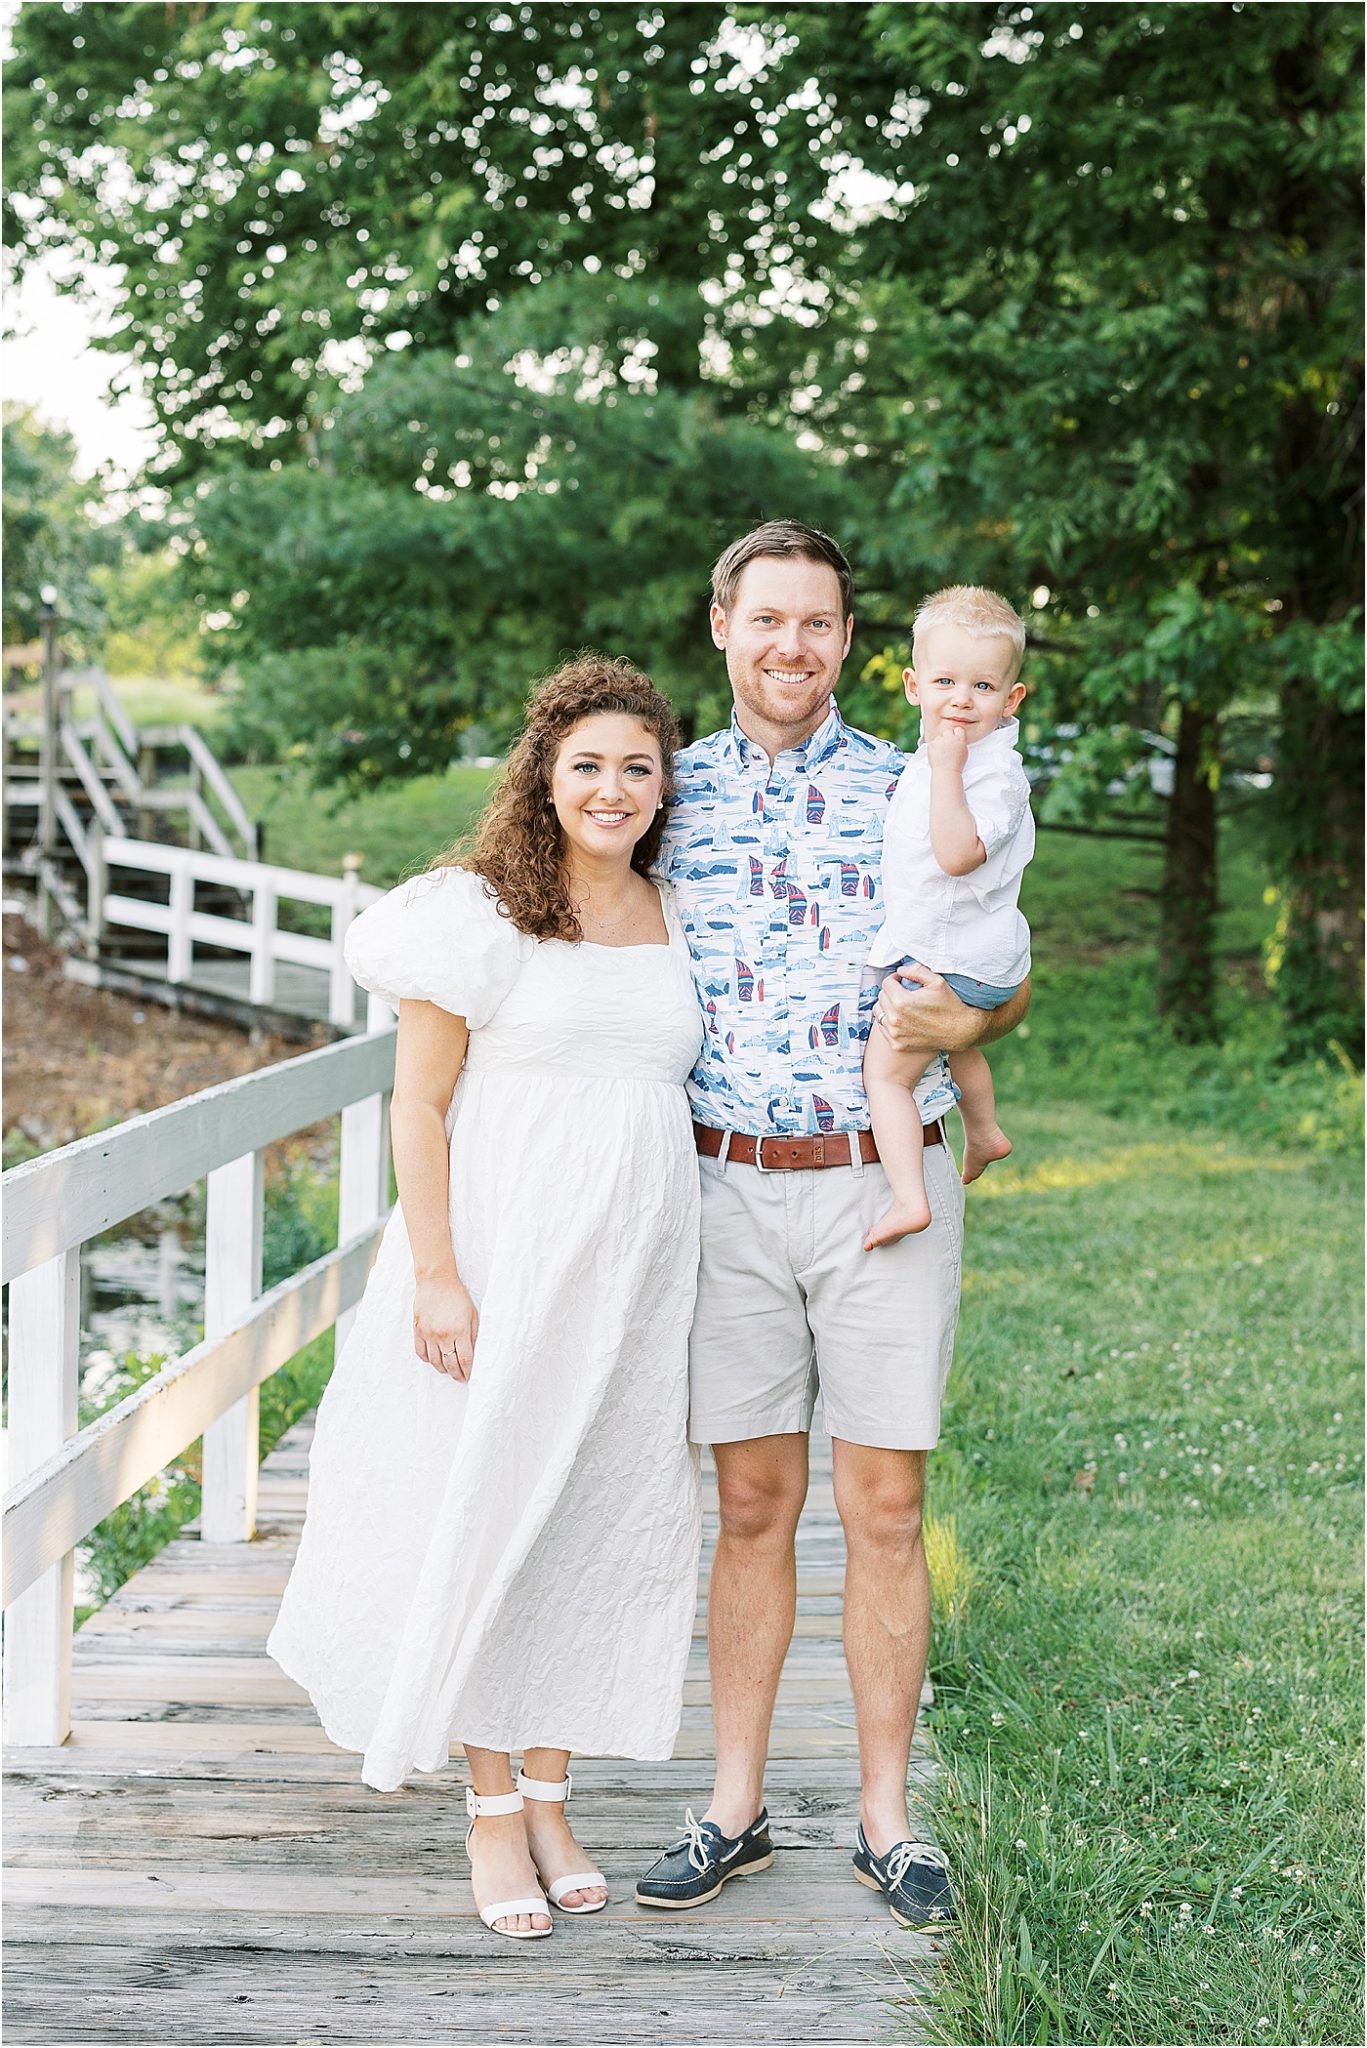 Family portrait during maternity session in Geist with Lindsay Konopa Photography.